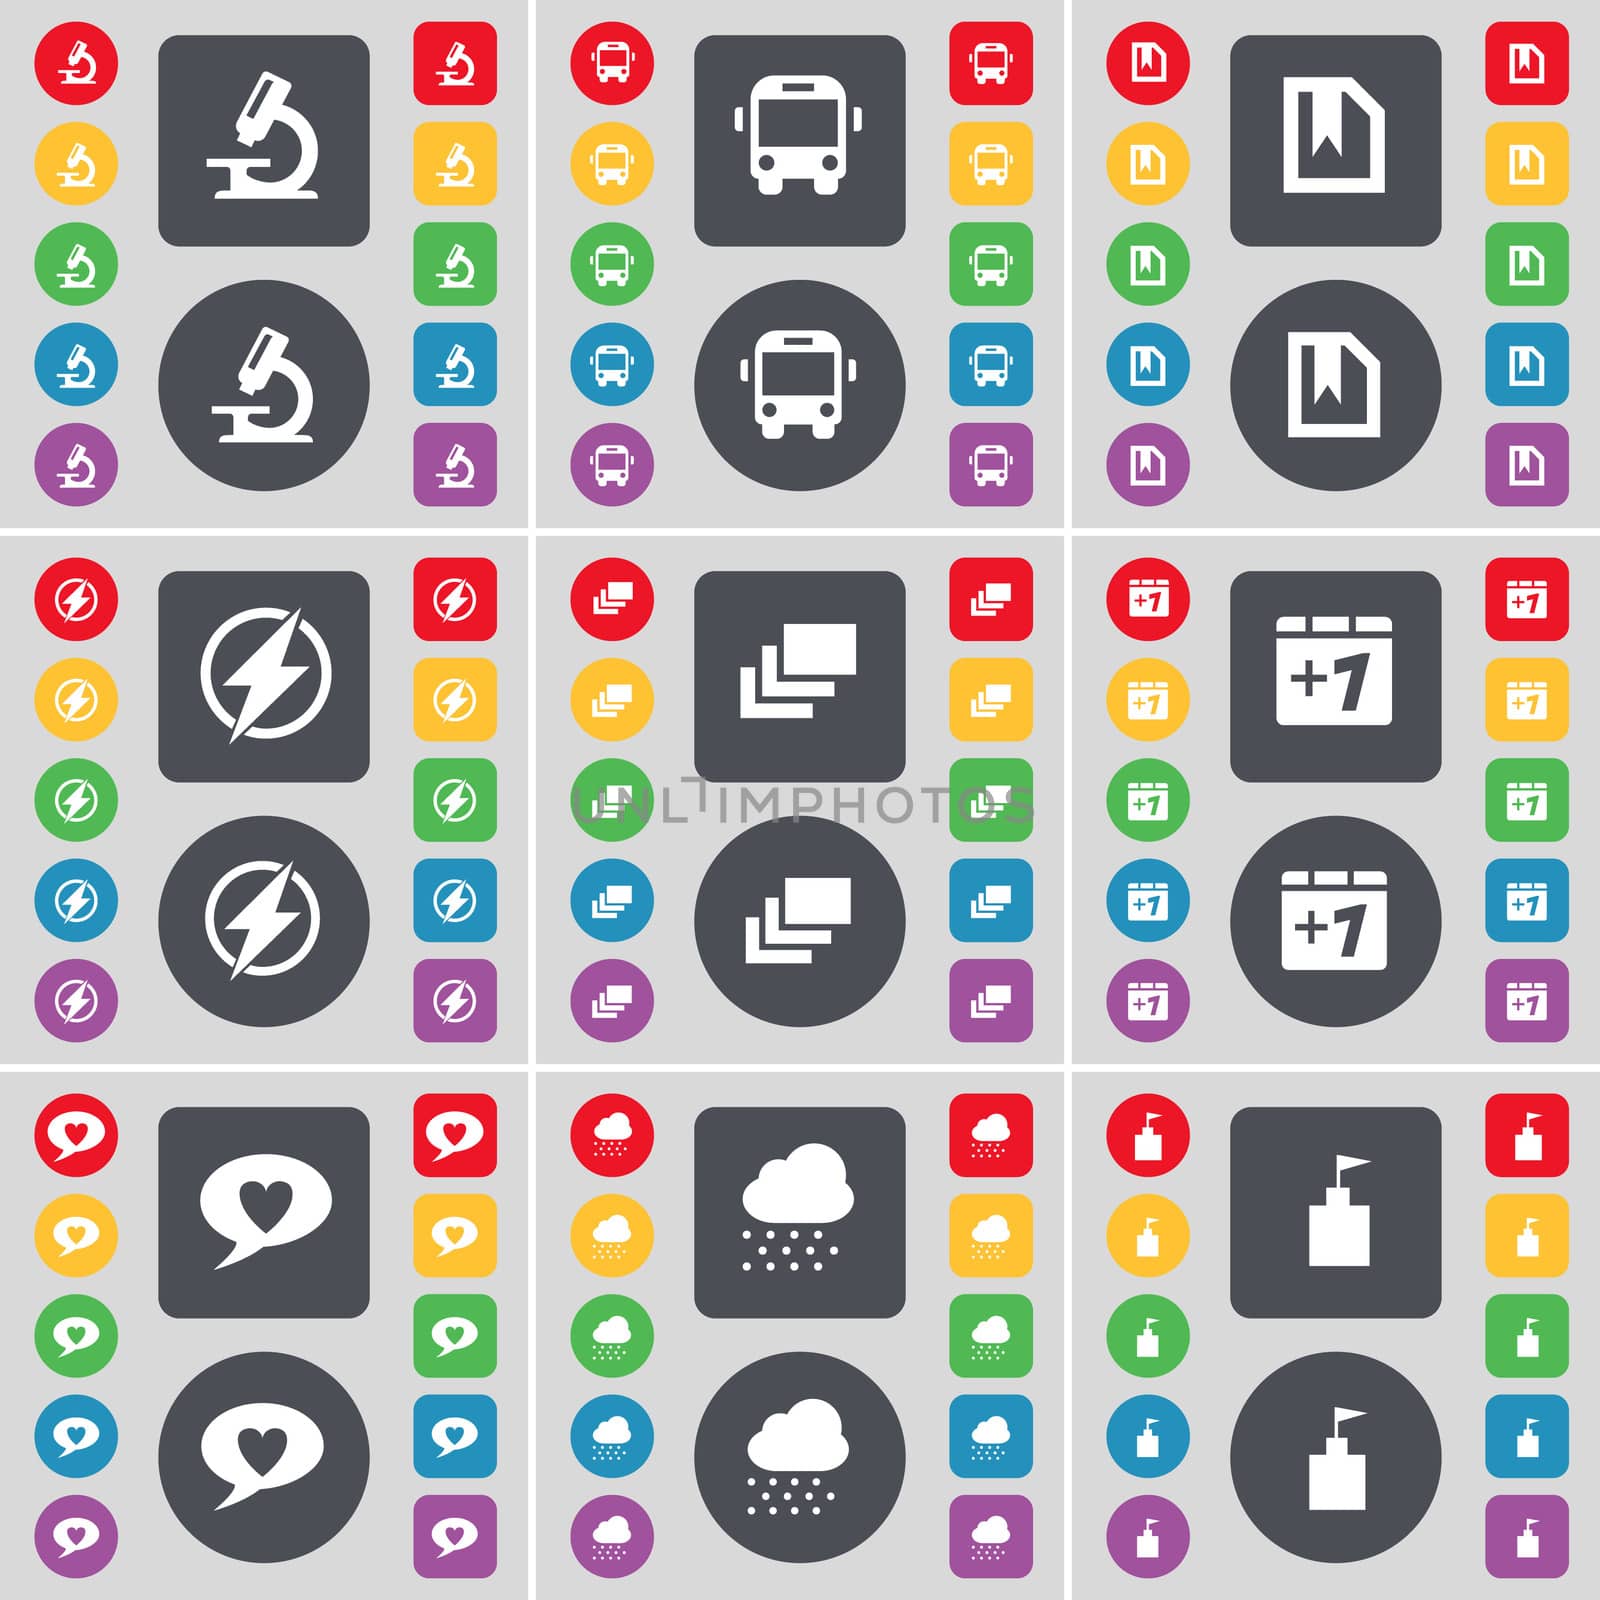 Microscope, Bus, File, Flash, Gallery, Plus one, Chat bubble, Cloud, Flag tower icon symbol. A large set of flat, colored buttons for your design.  by serhii_lohvyniuk